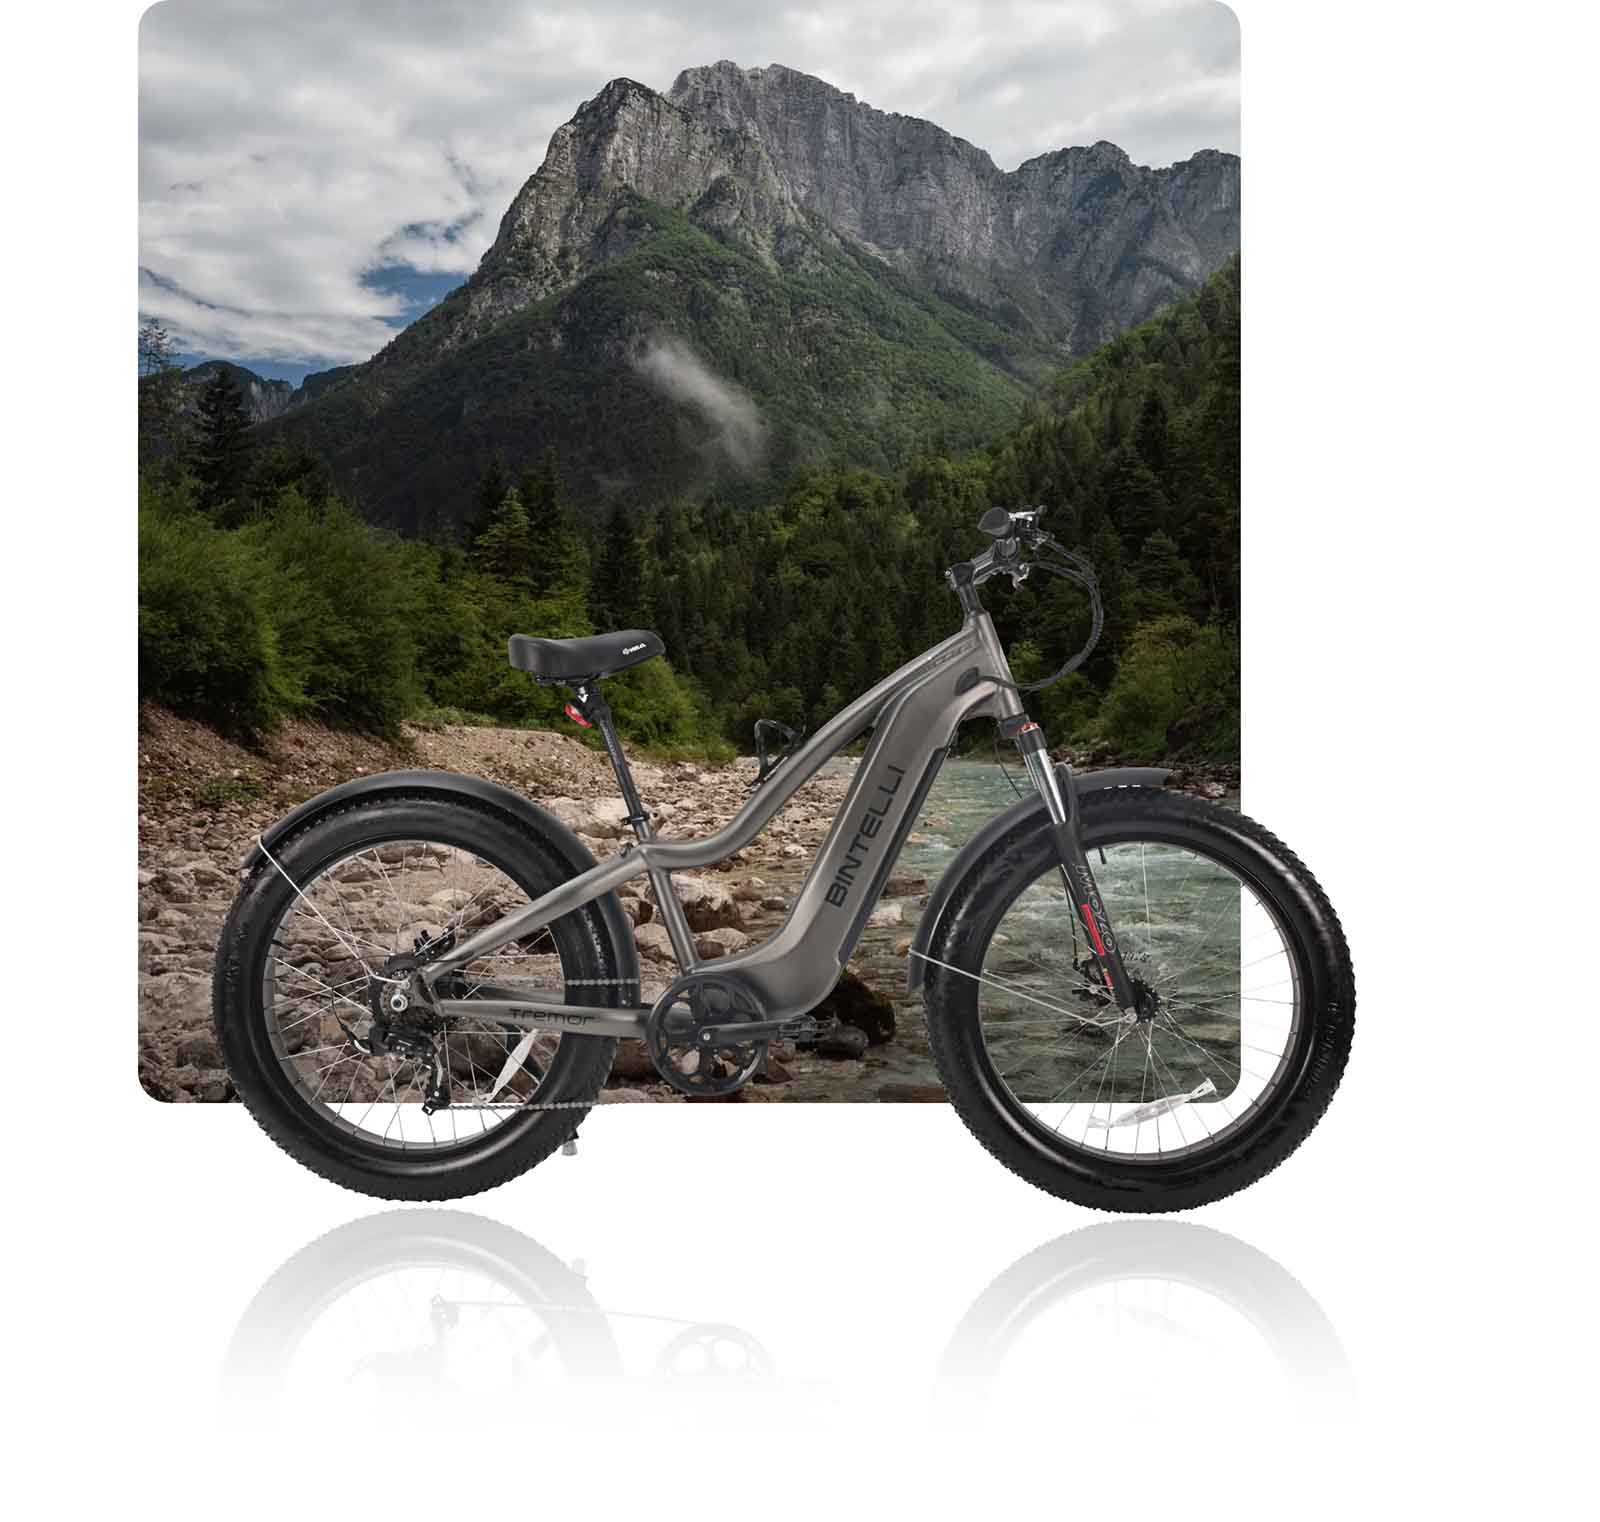 Bintelli gray electric bike parked on the side of a mountain